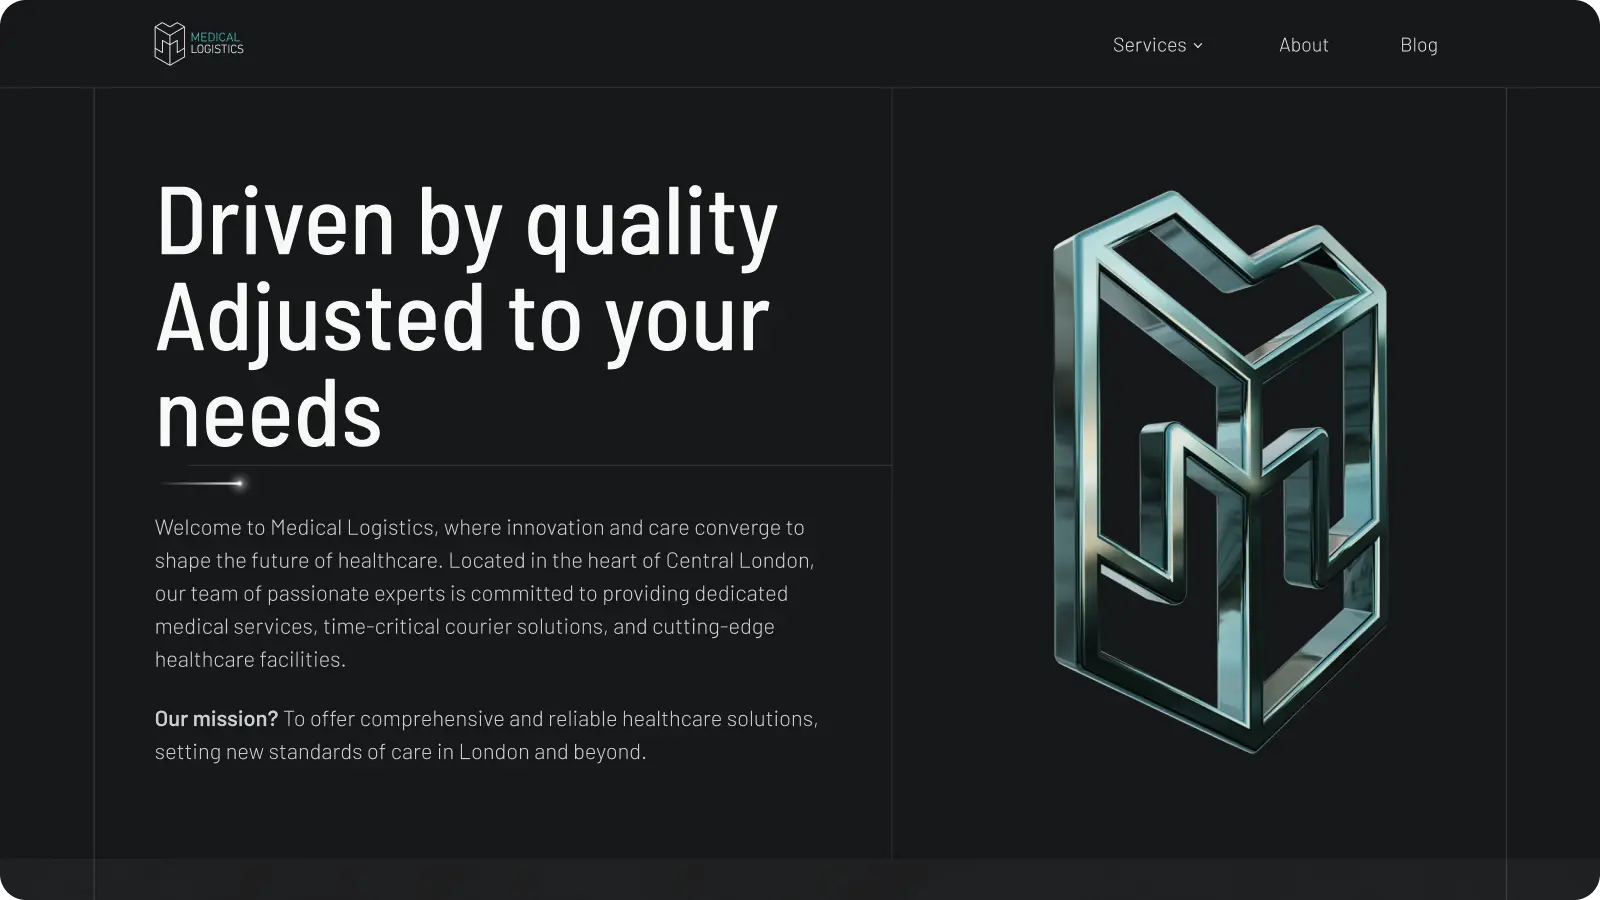 Dark mode design. On the left big headline: "Driven by quality, adjusted to your needs". On the right is a 3d model of the Medical Logistics logo.